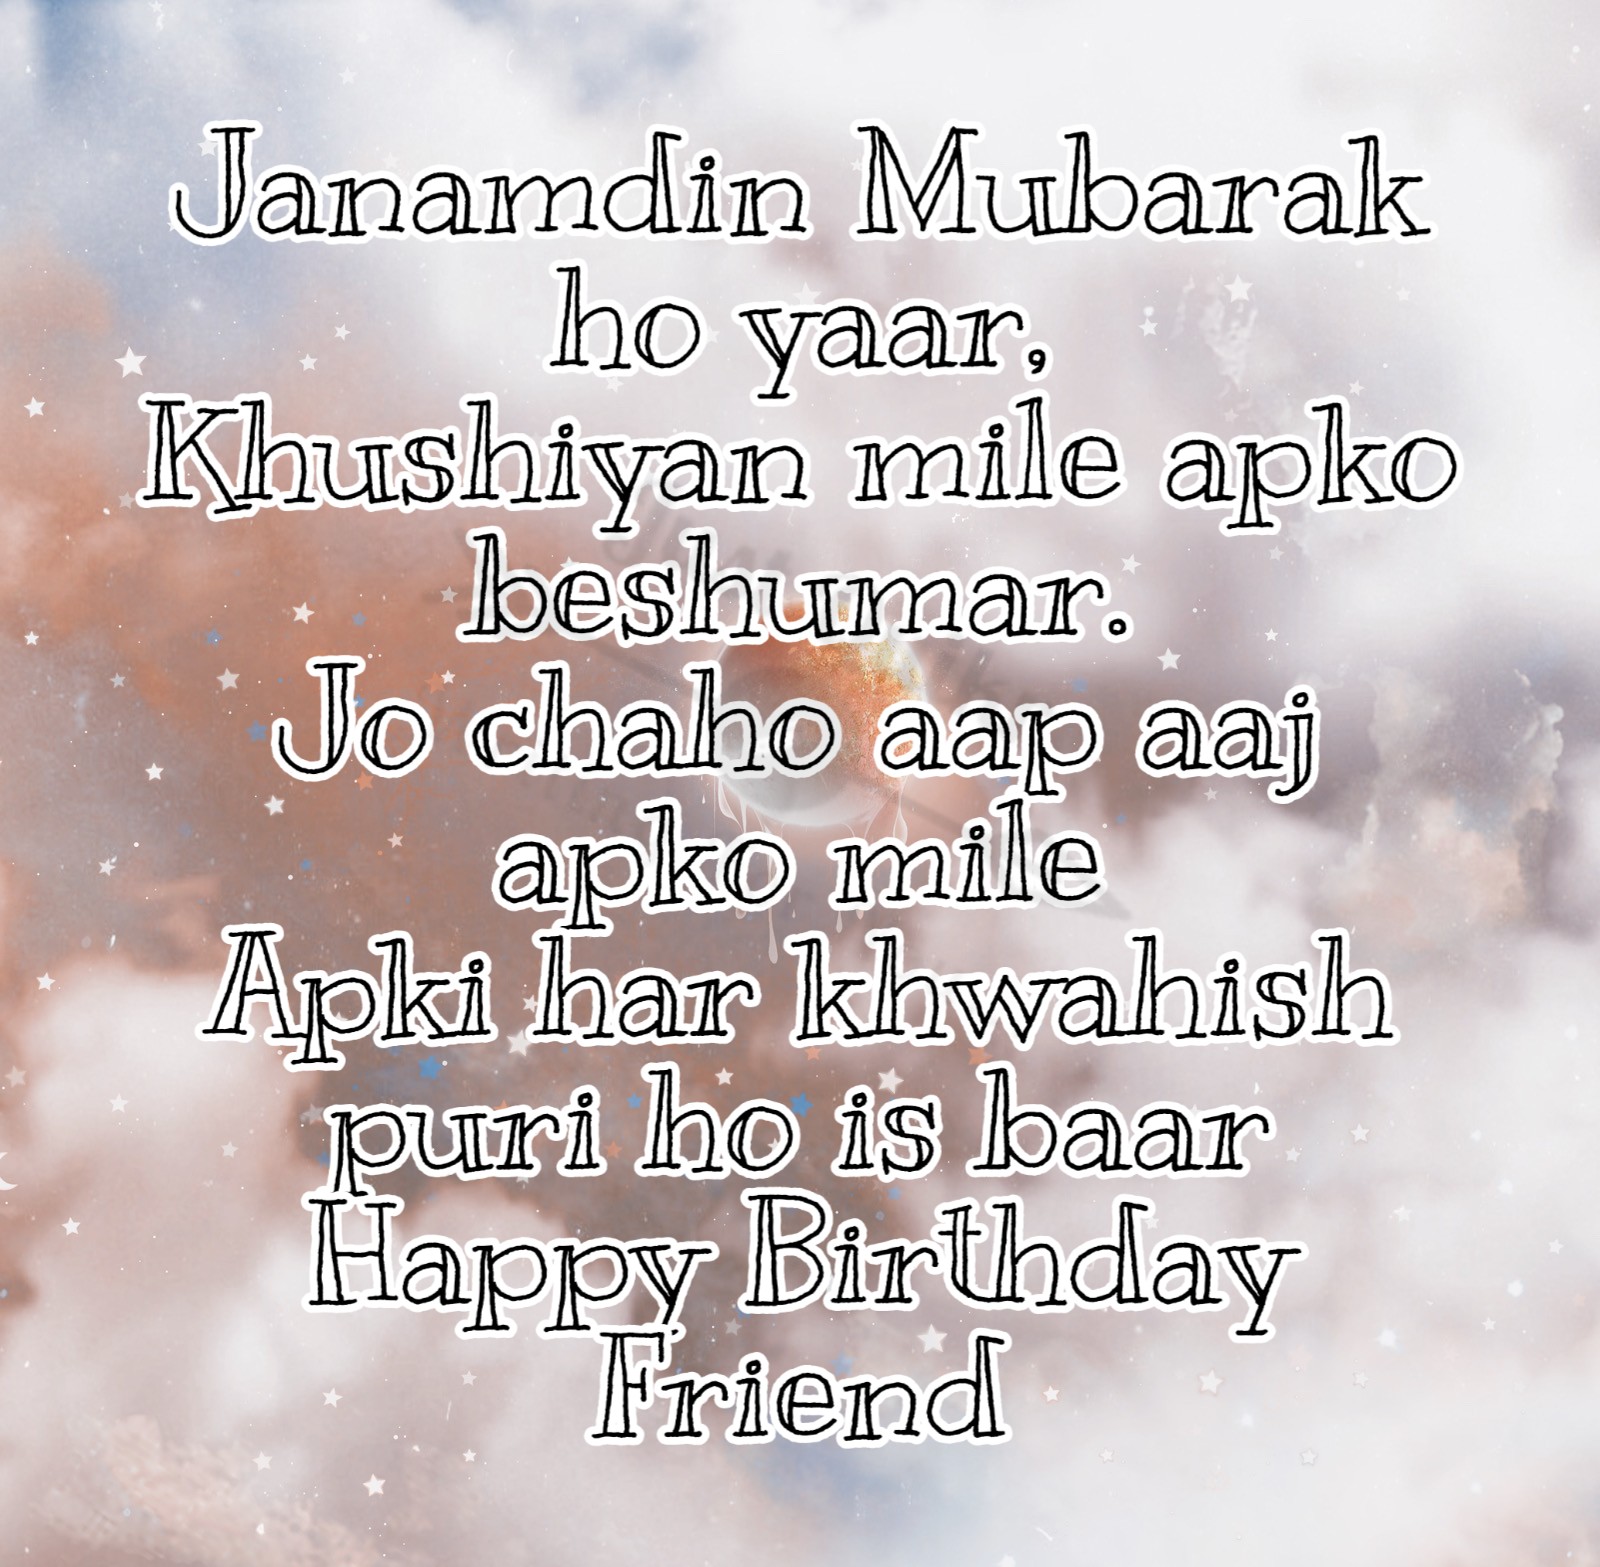 Happy Birthday Shayari Greetings Sayings SMS and Images for Male Friend